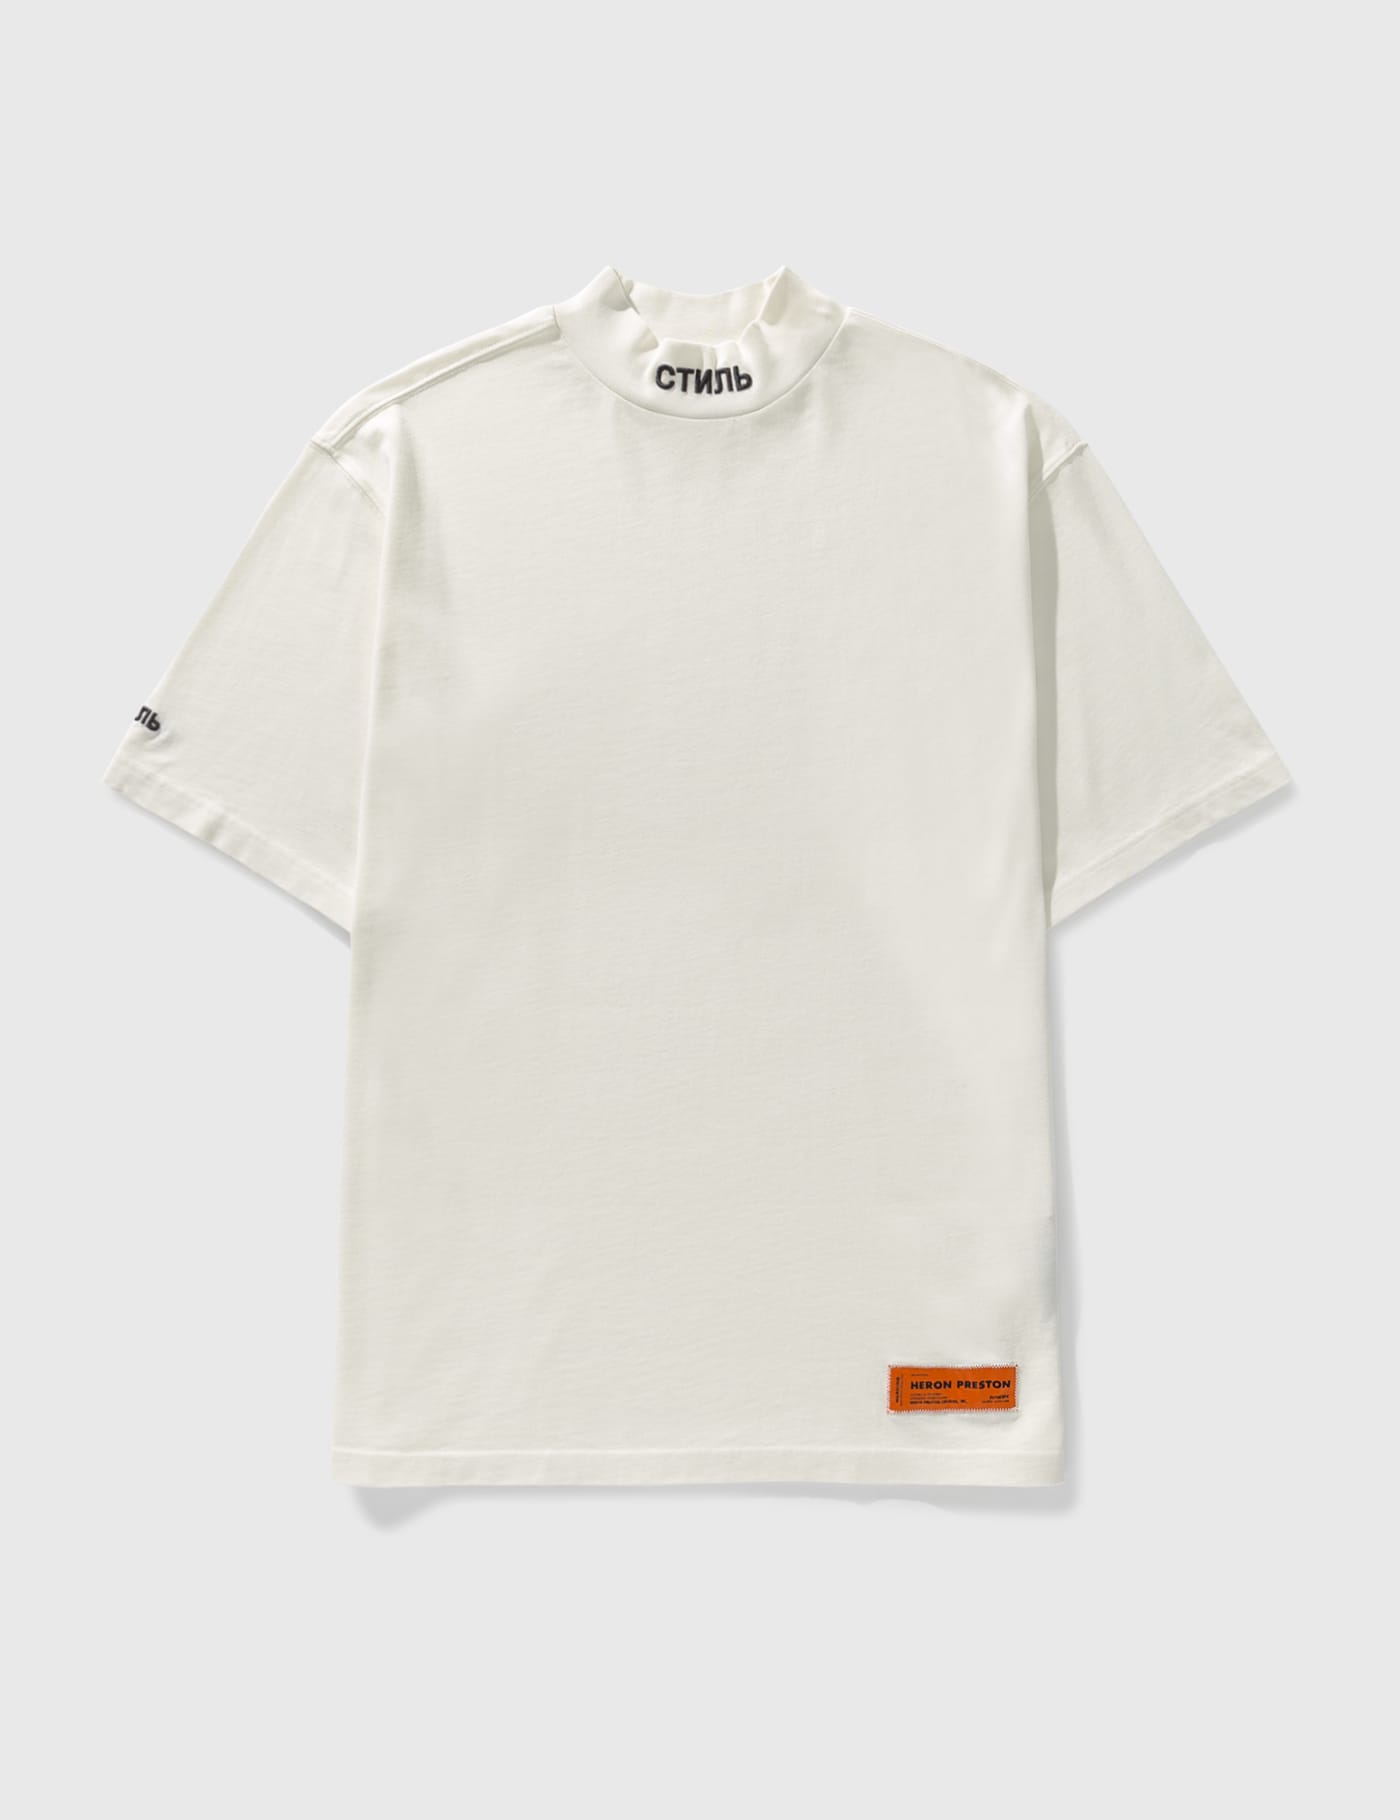 Heron Preston | HBX - Globally Curated Fashion and Lifestyle by 